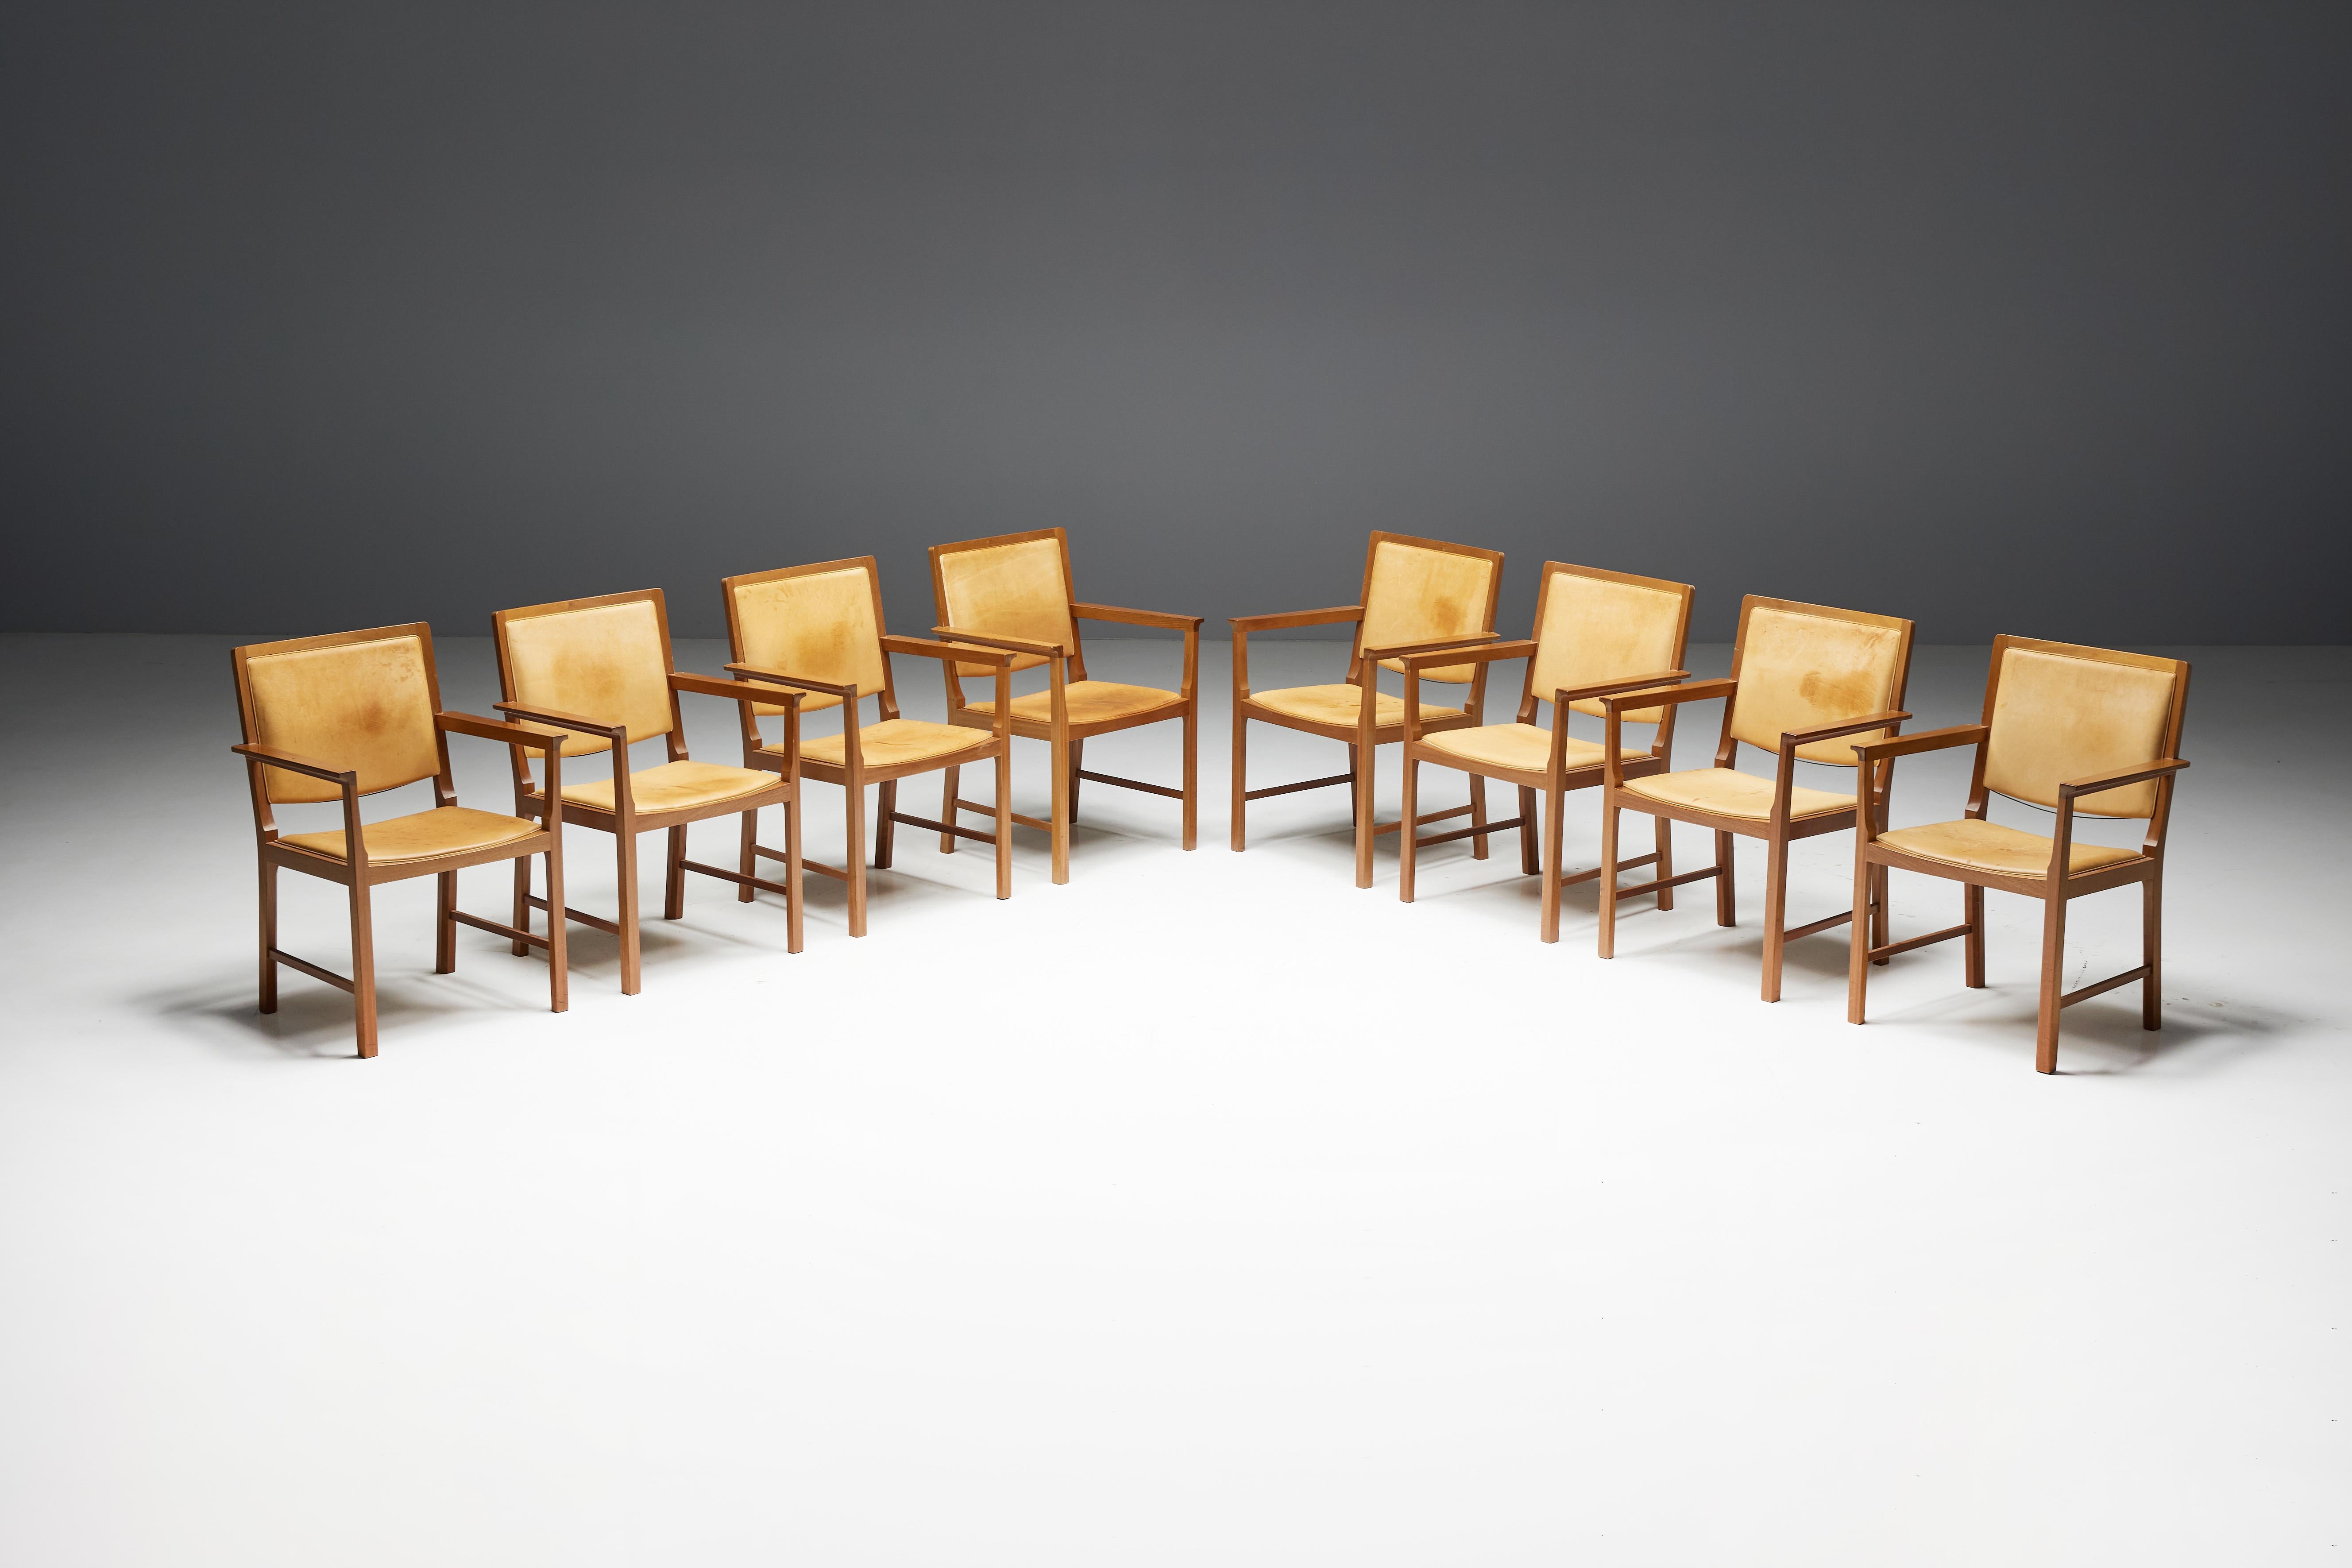 Scandinavian conference chairs crafted from a harmonious blend of natural leather and wood. Each chair features luxurious patinated natural leather upholstery and a sleek wooden frame. With nine pieces available and priced per piece, these chairs